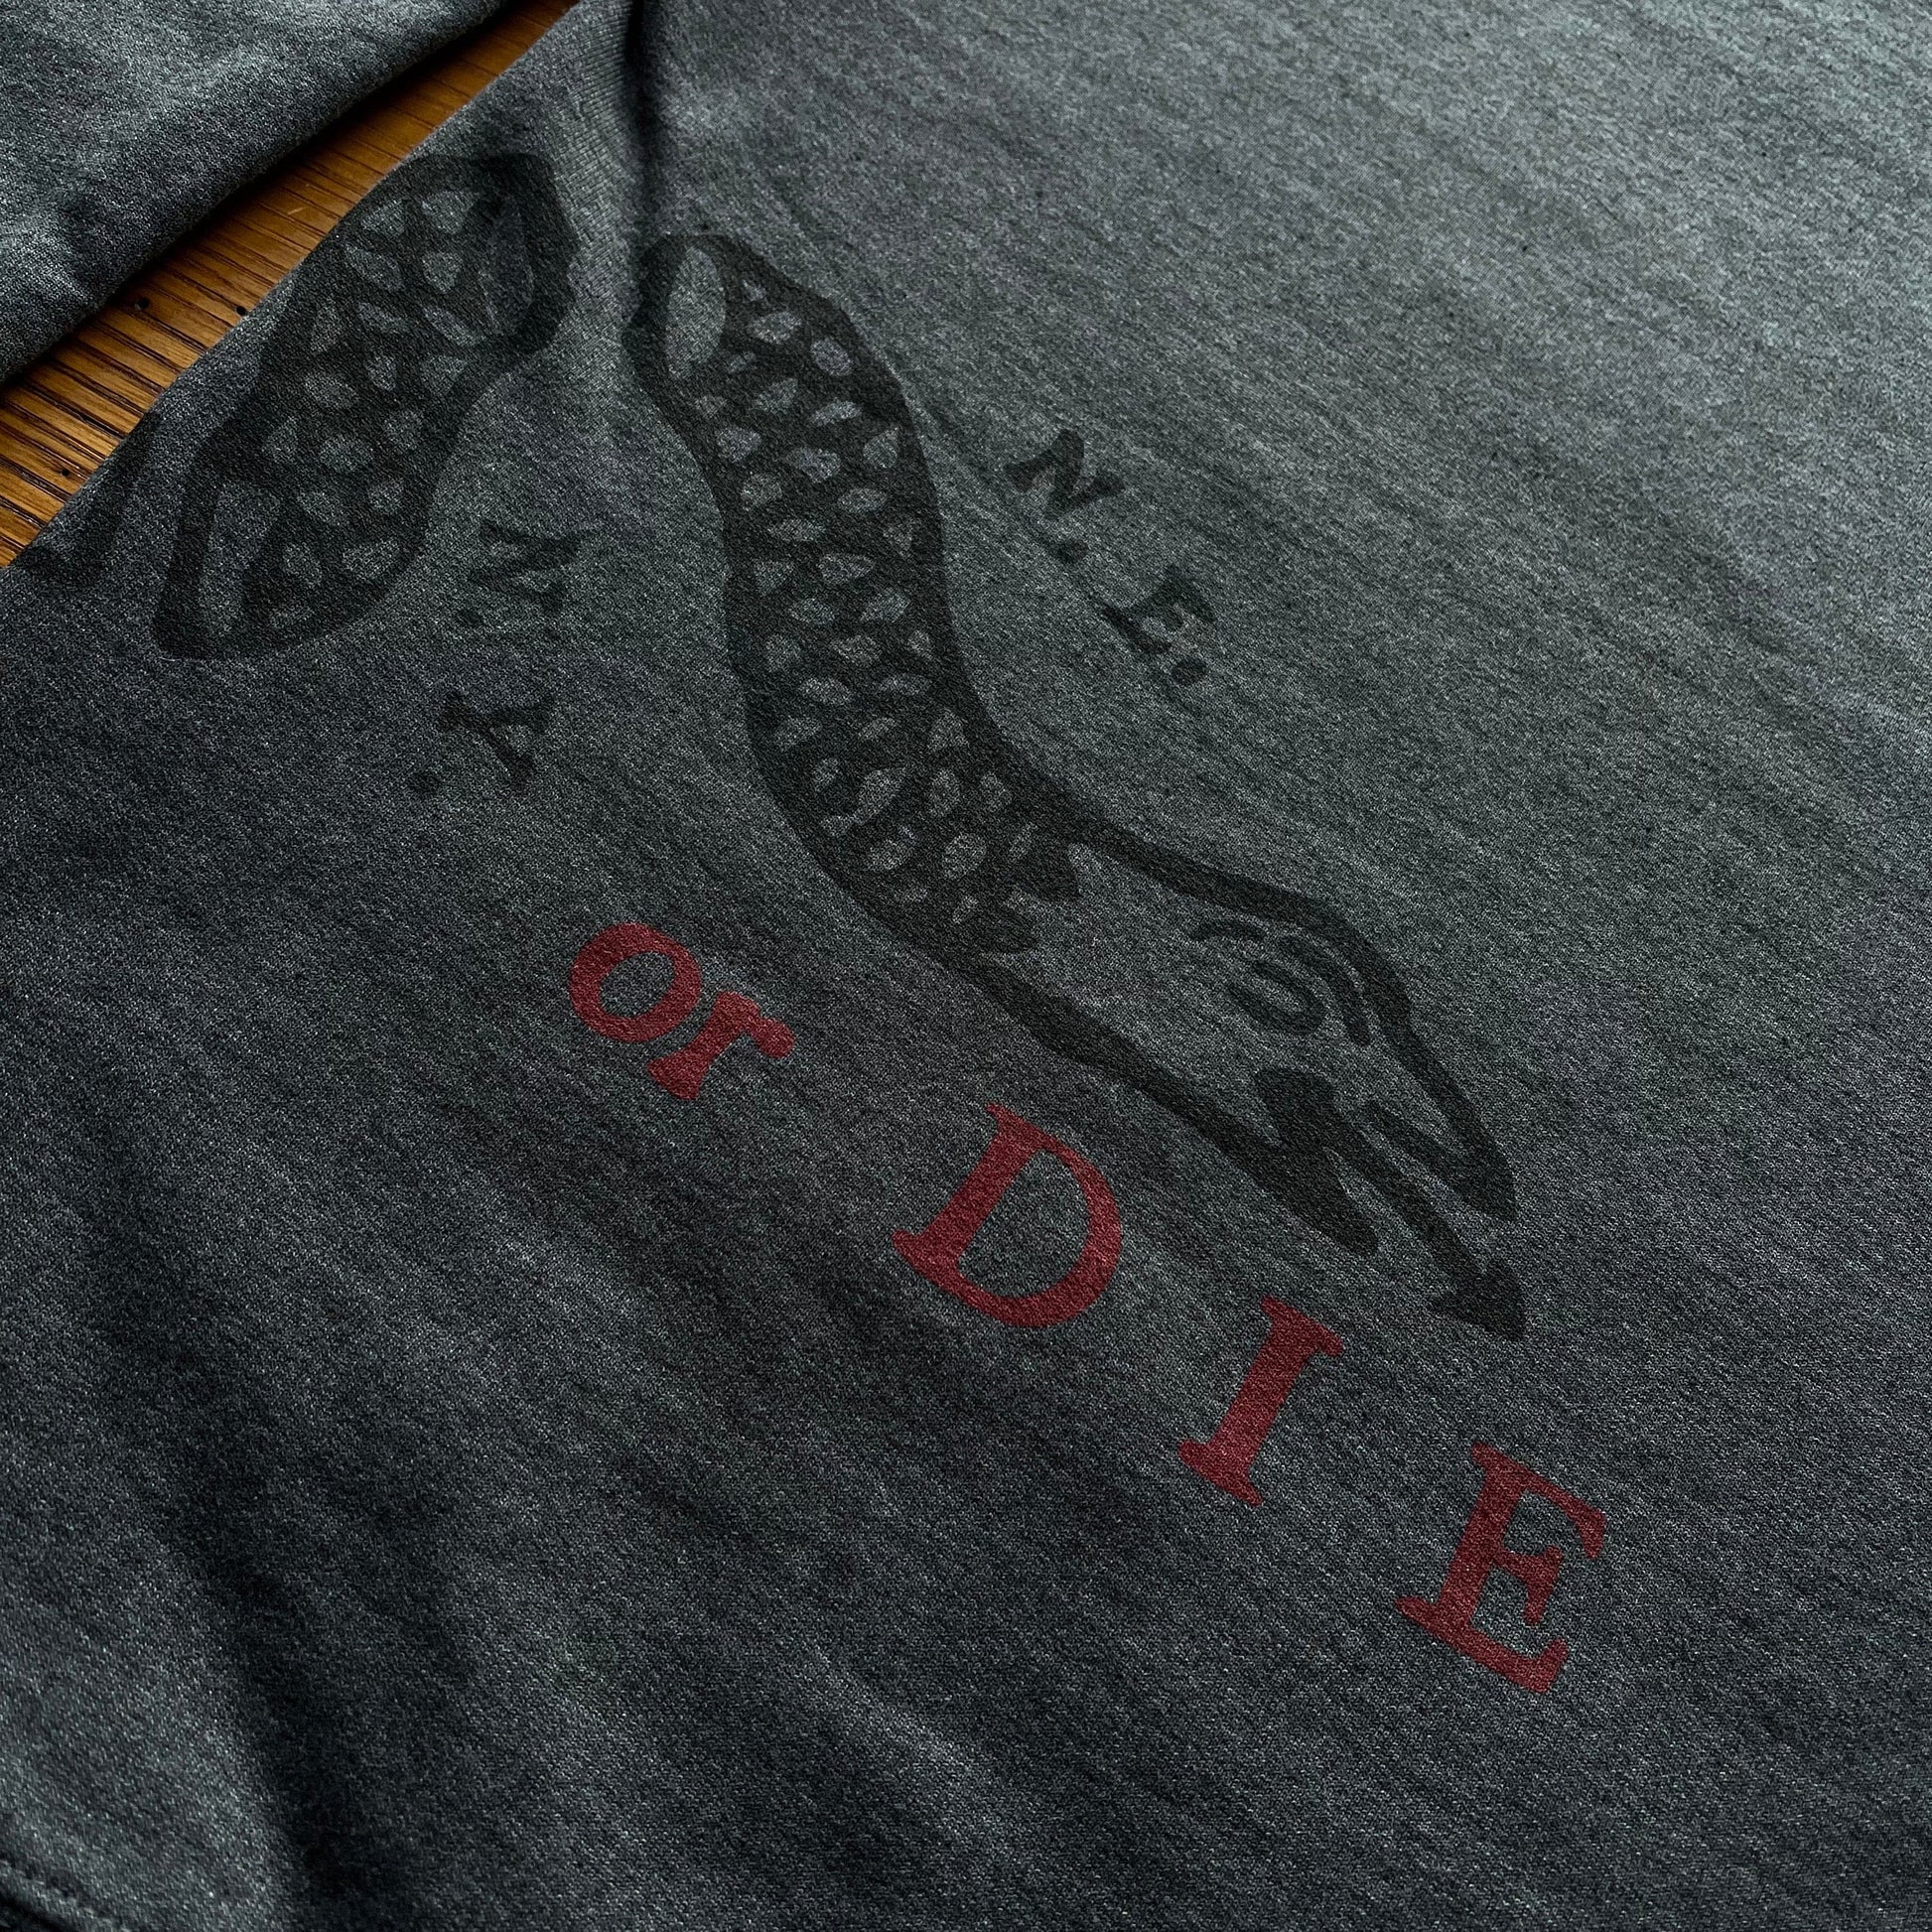 Close-up of Back of "Join or Die" Crewneck sweatshirt from the history list store